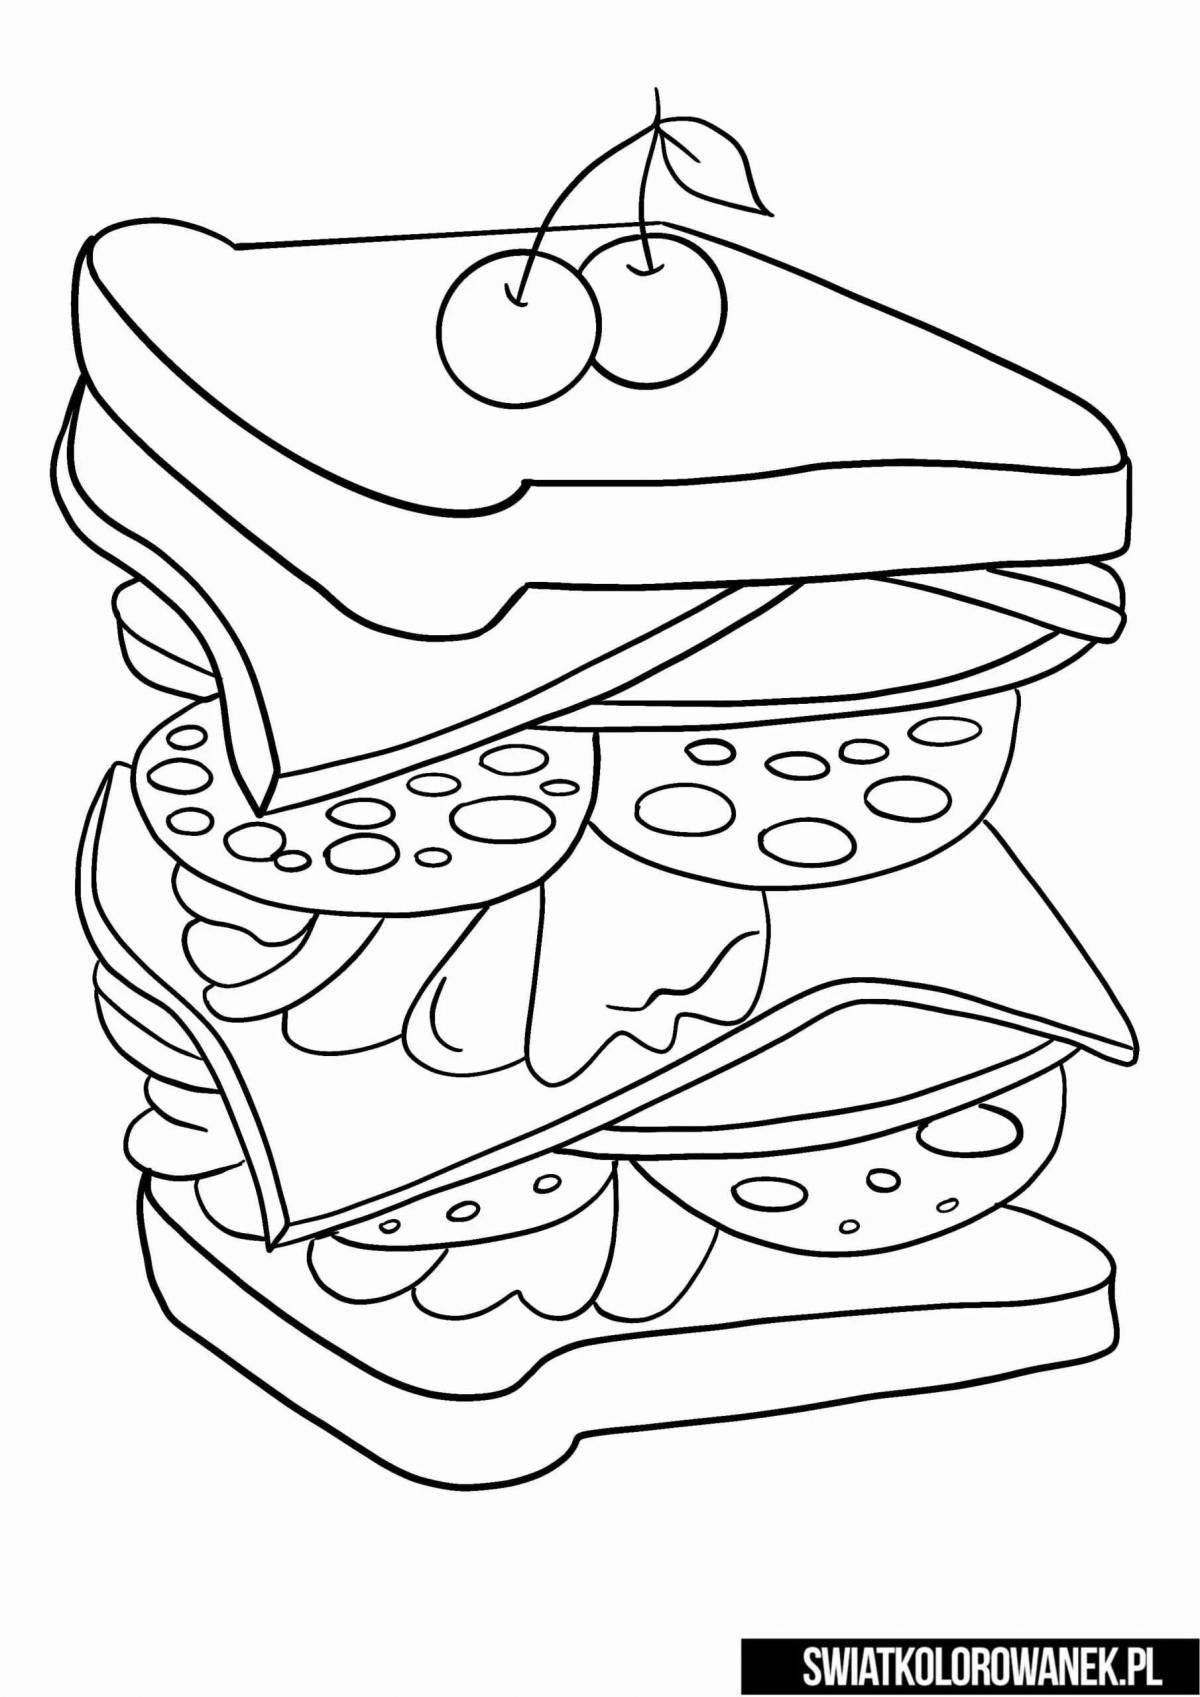 An interesting sandwich coloring book for kids